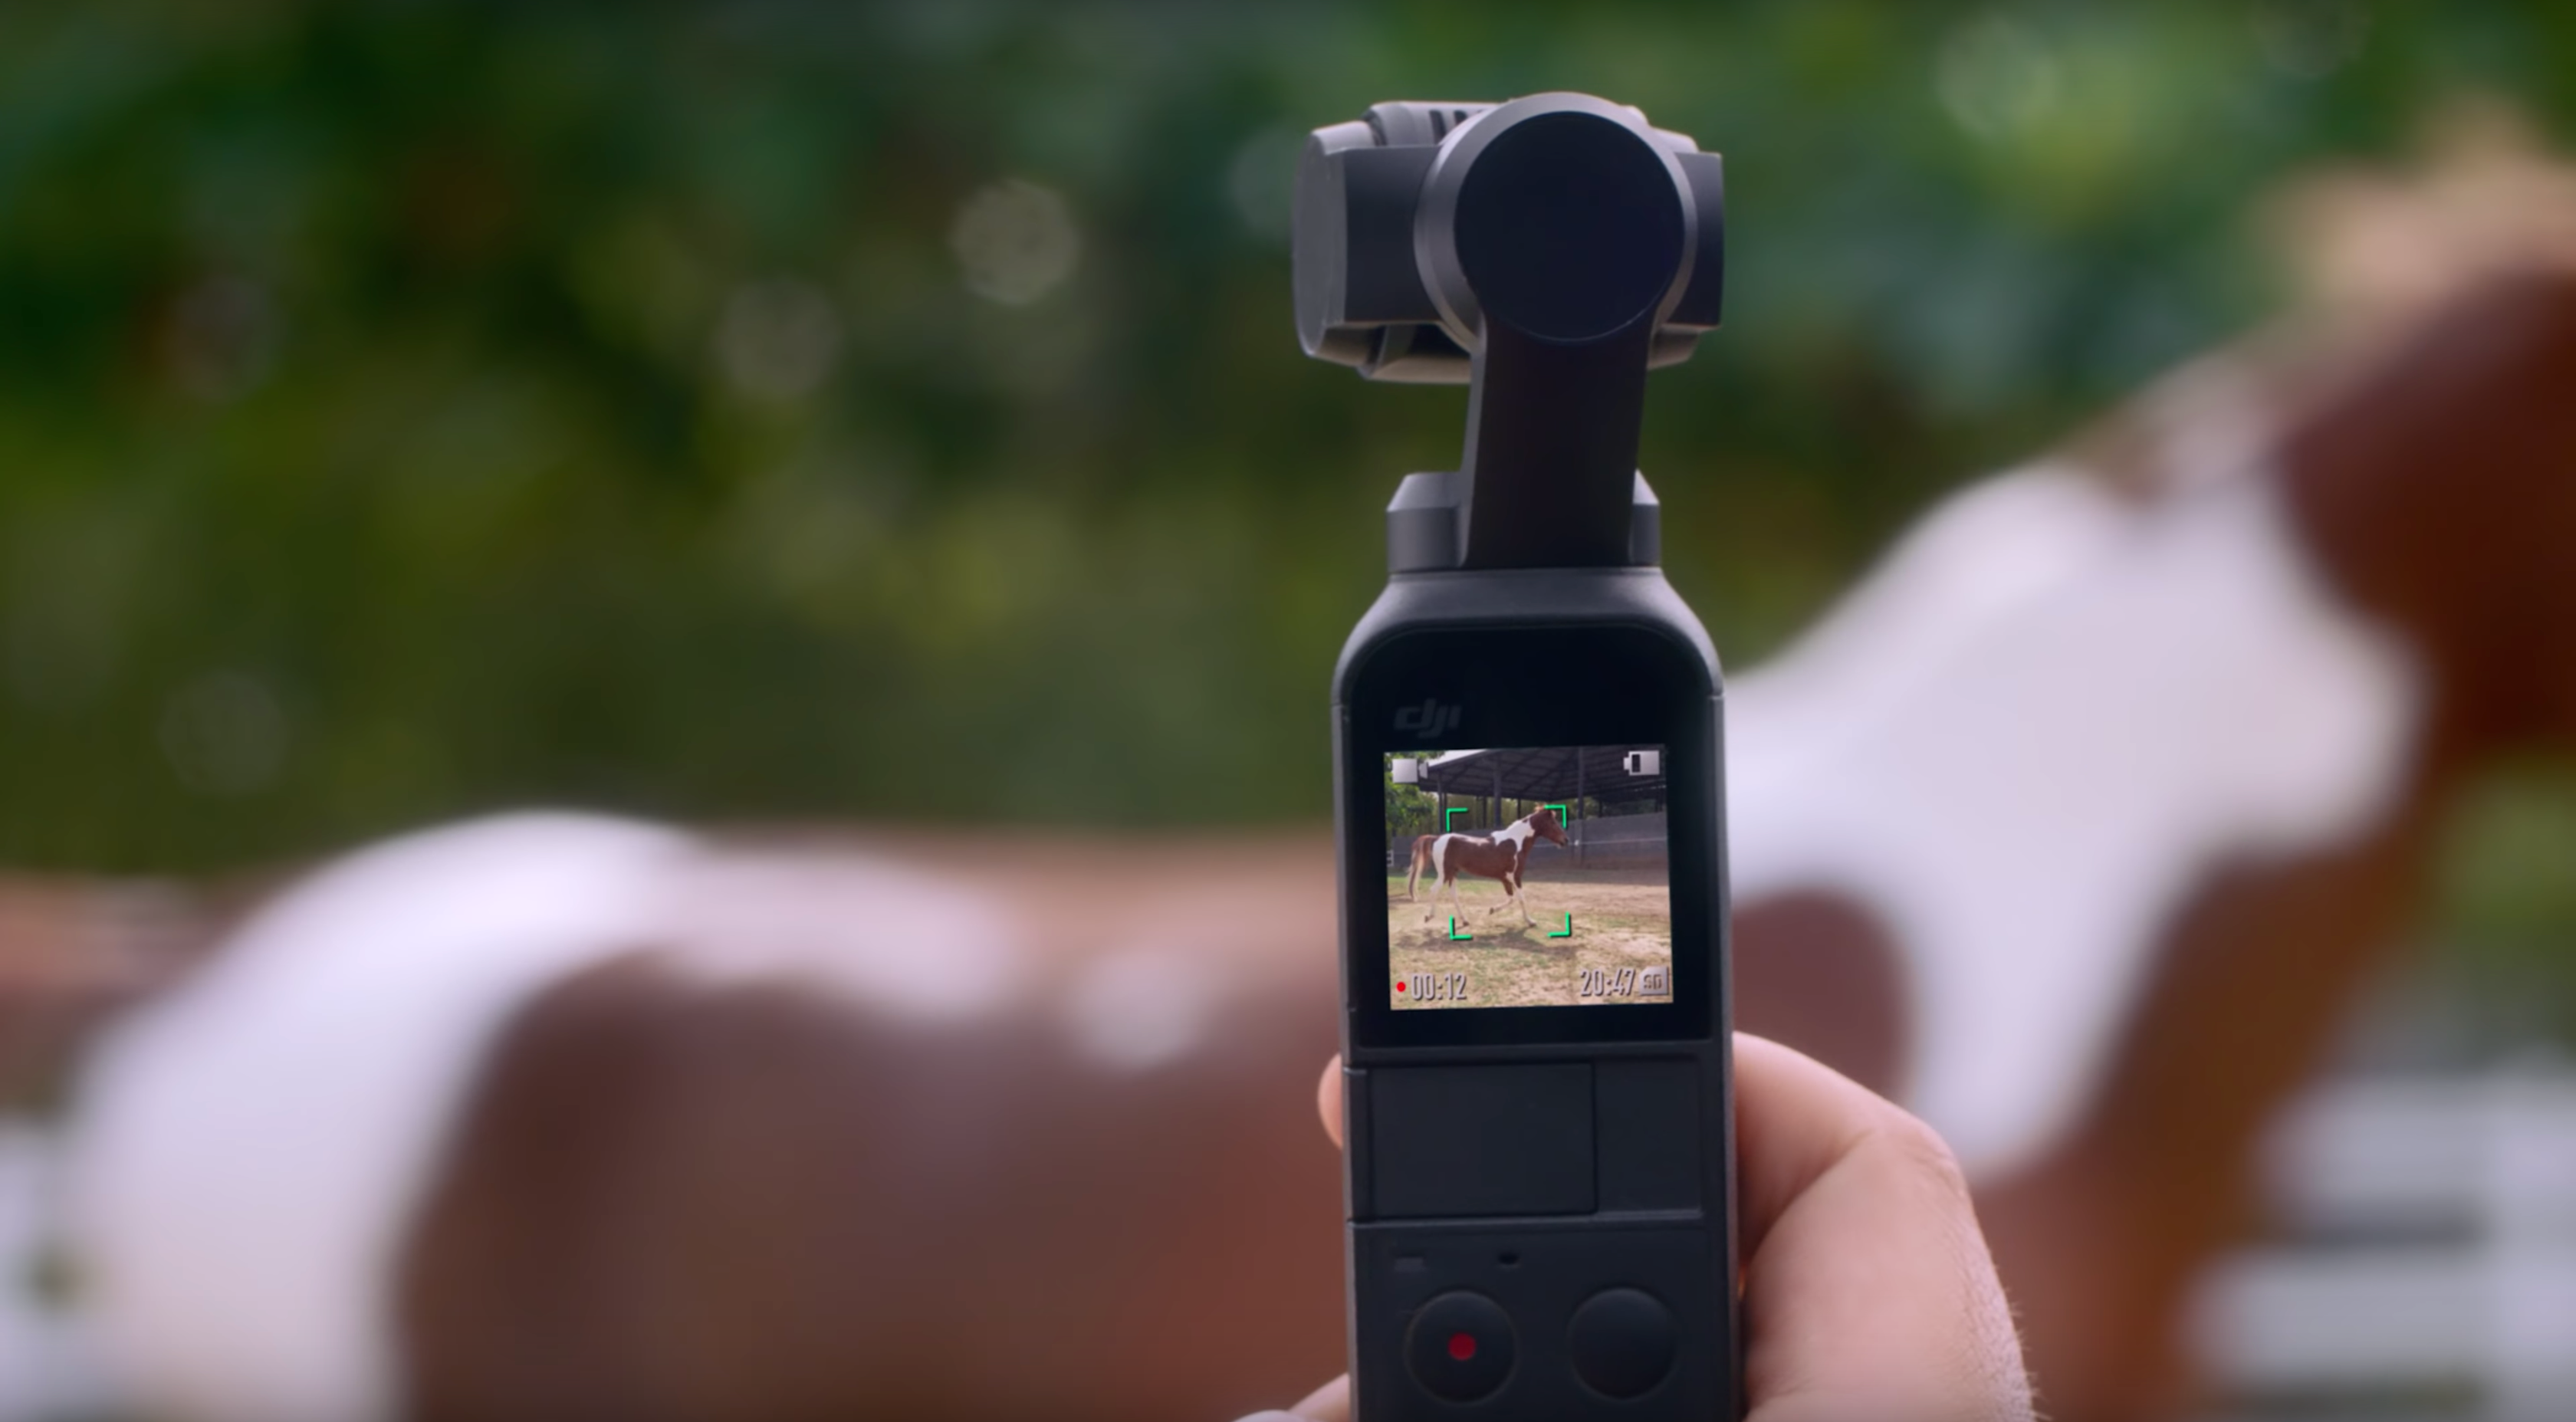 Here are 5 Cool Shots You Can Capture with a Mini Gimbal [Video]